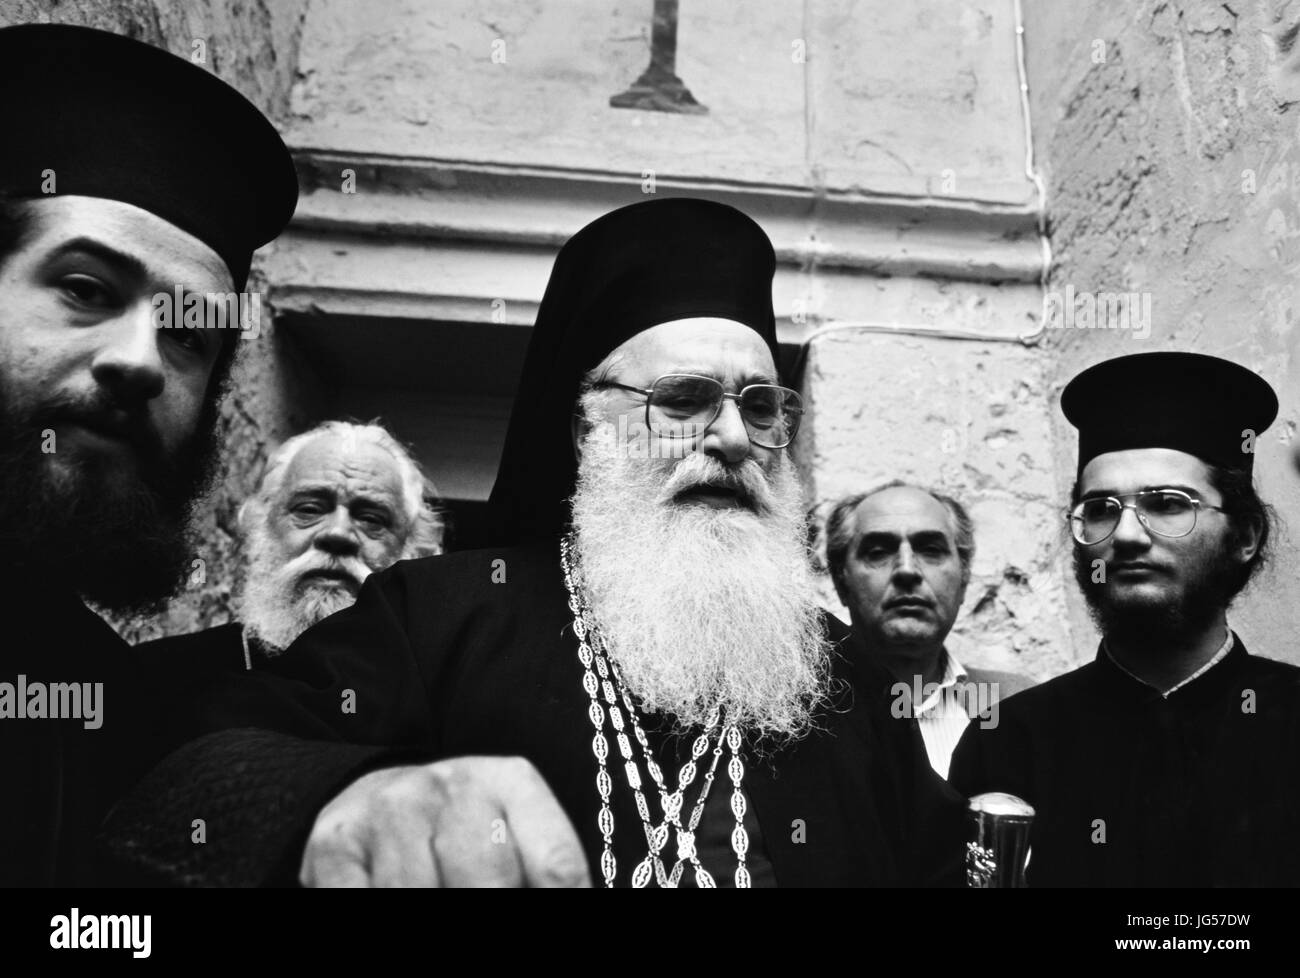 The Greek Patriarch of Jerusalem Outside The Church of the Holy Sepulchre Moments After being Caught Up In A Tear Gas Attack, Jerusalem, Israel Stock Photo